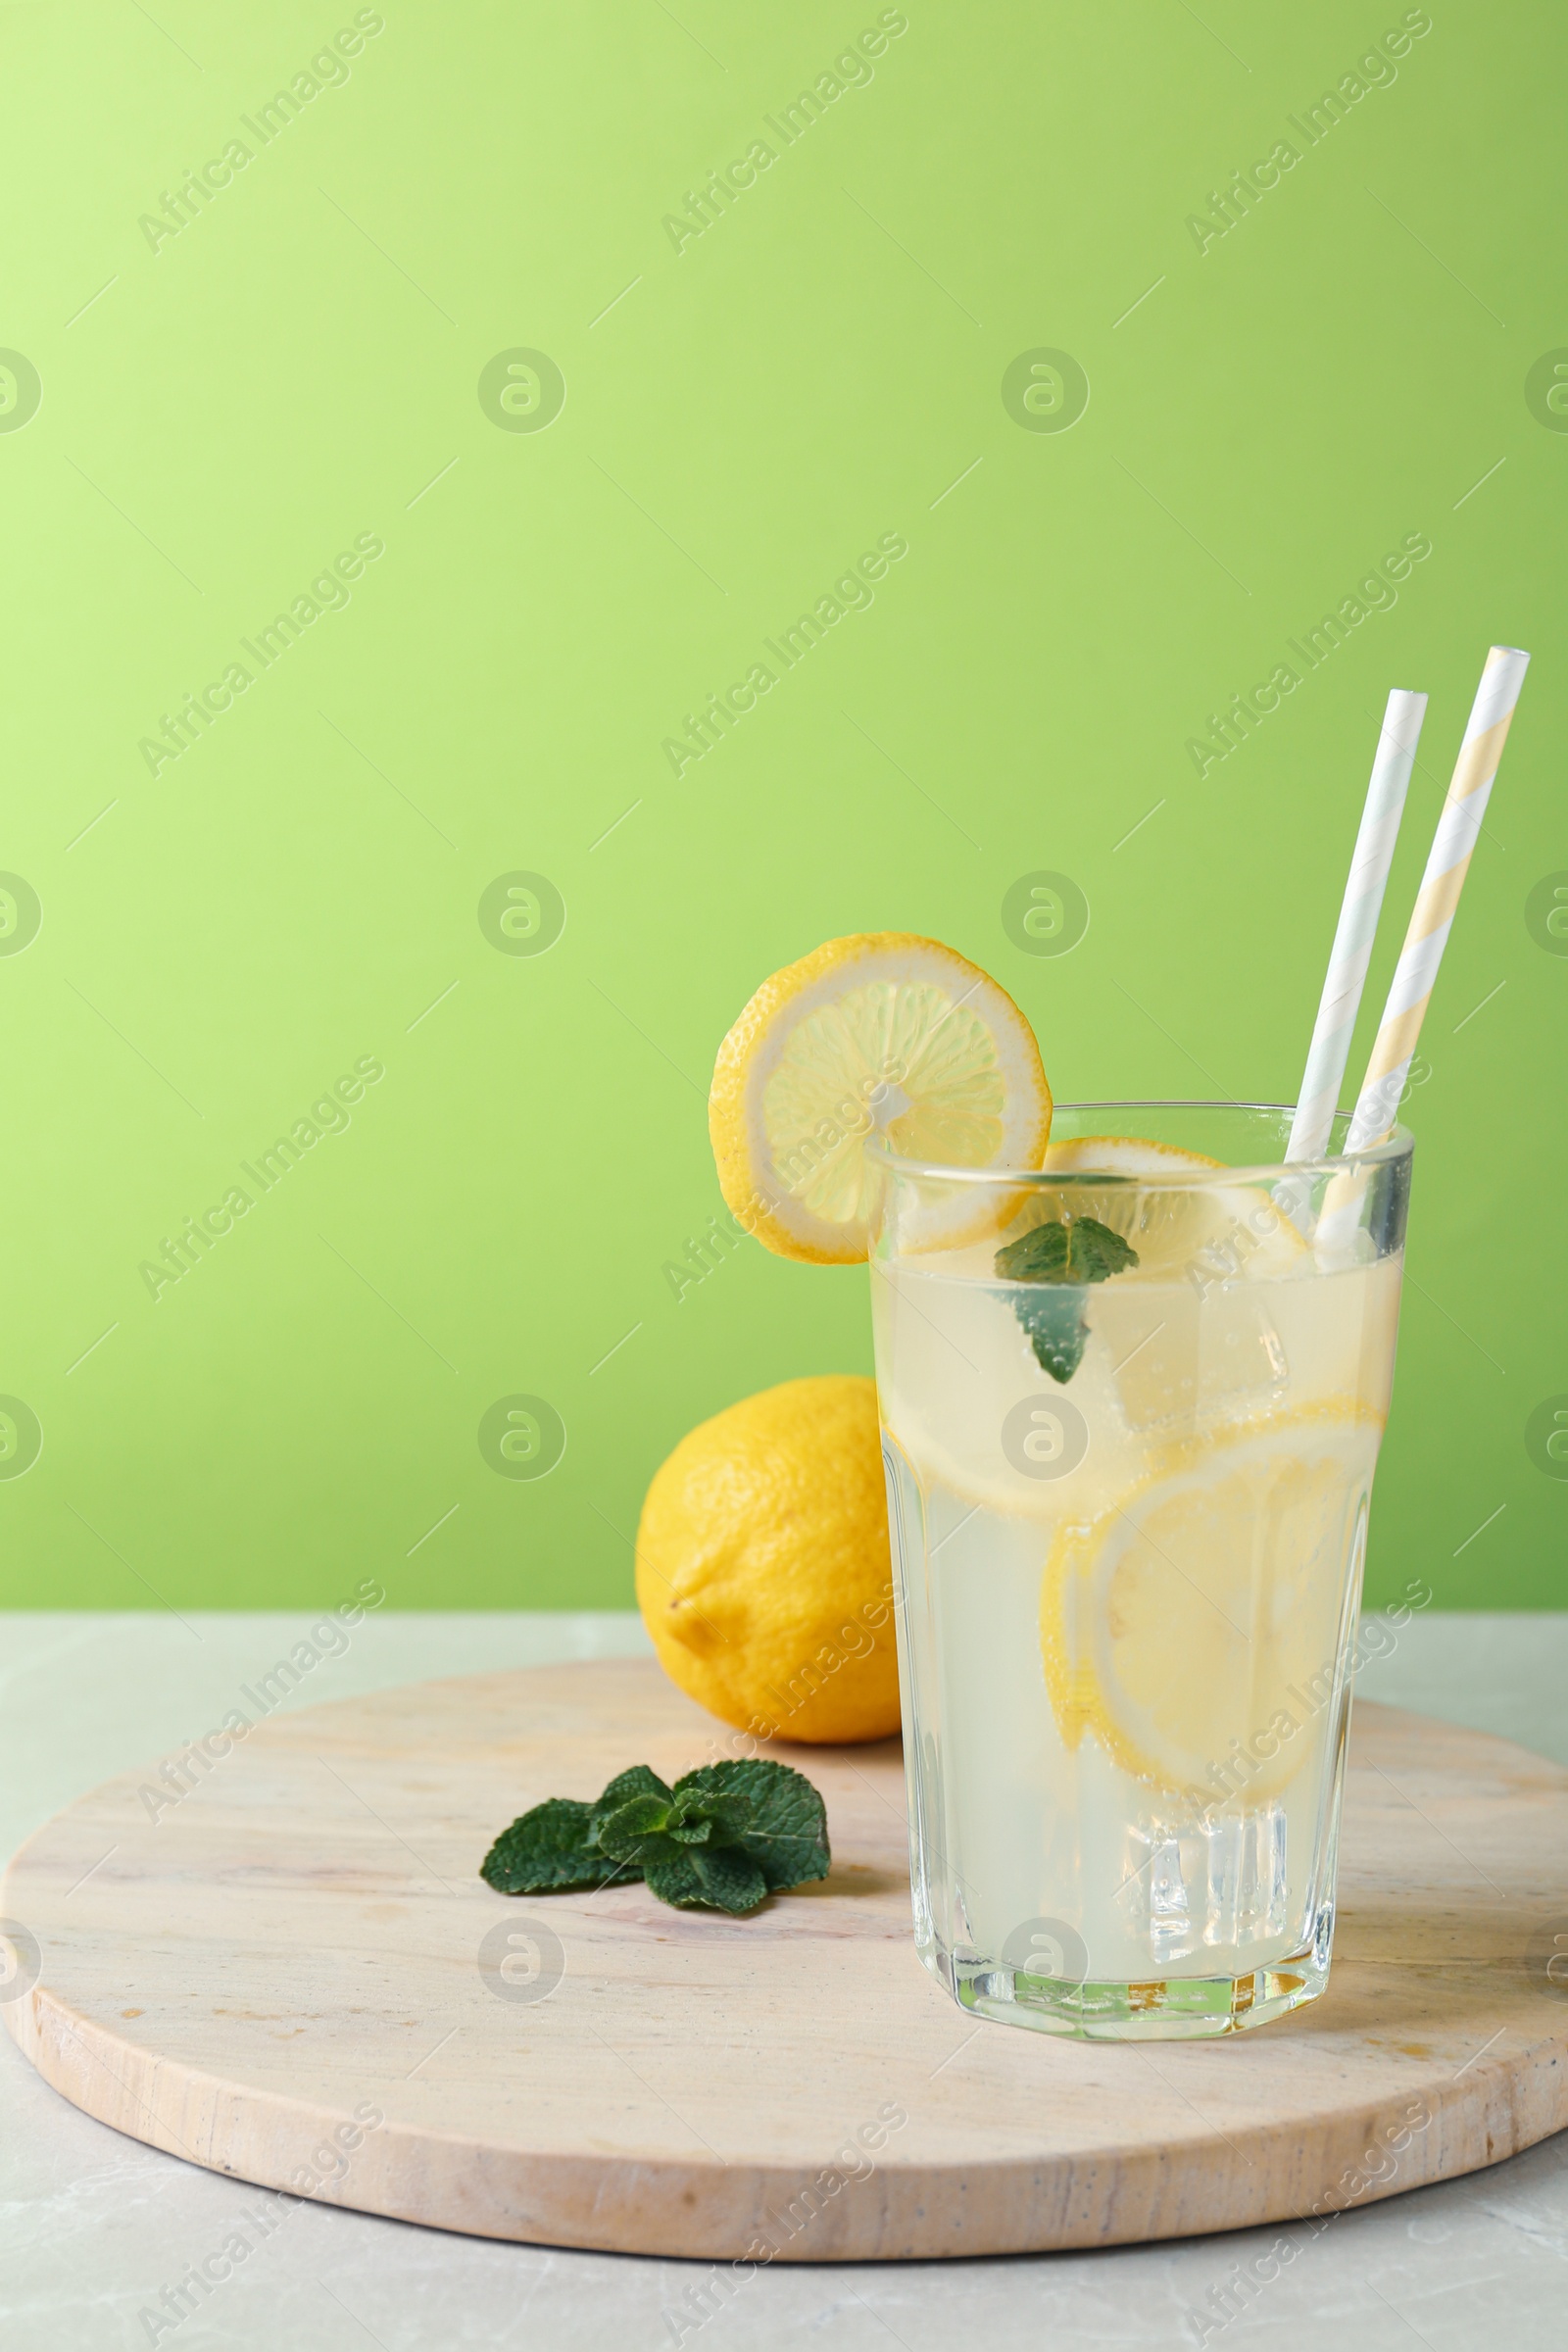 Photo of Delicious lemonade in glass on light table